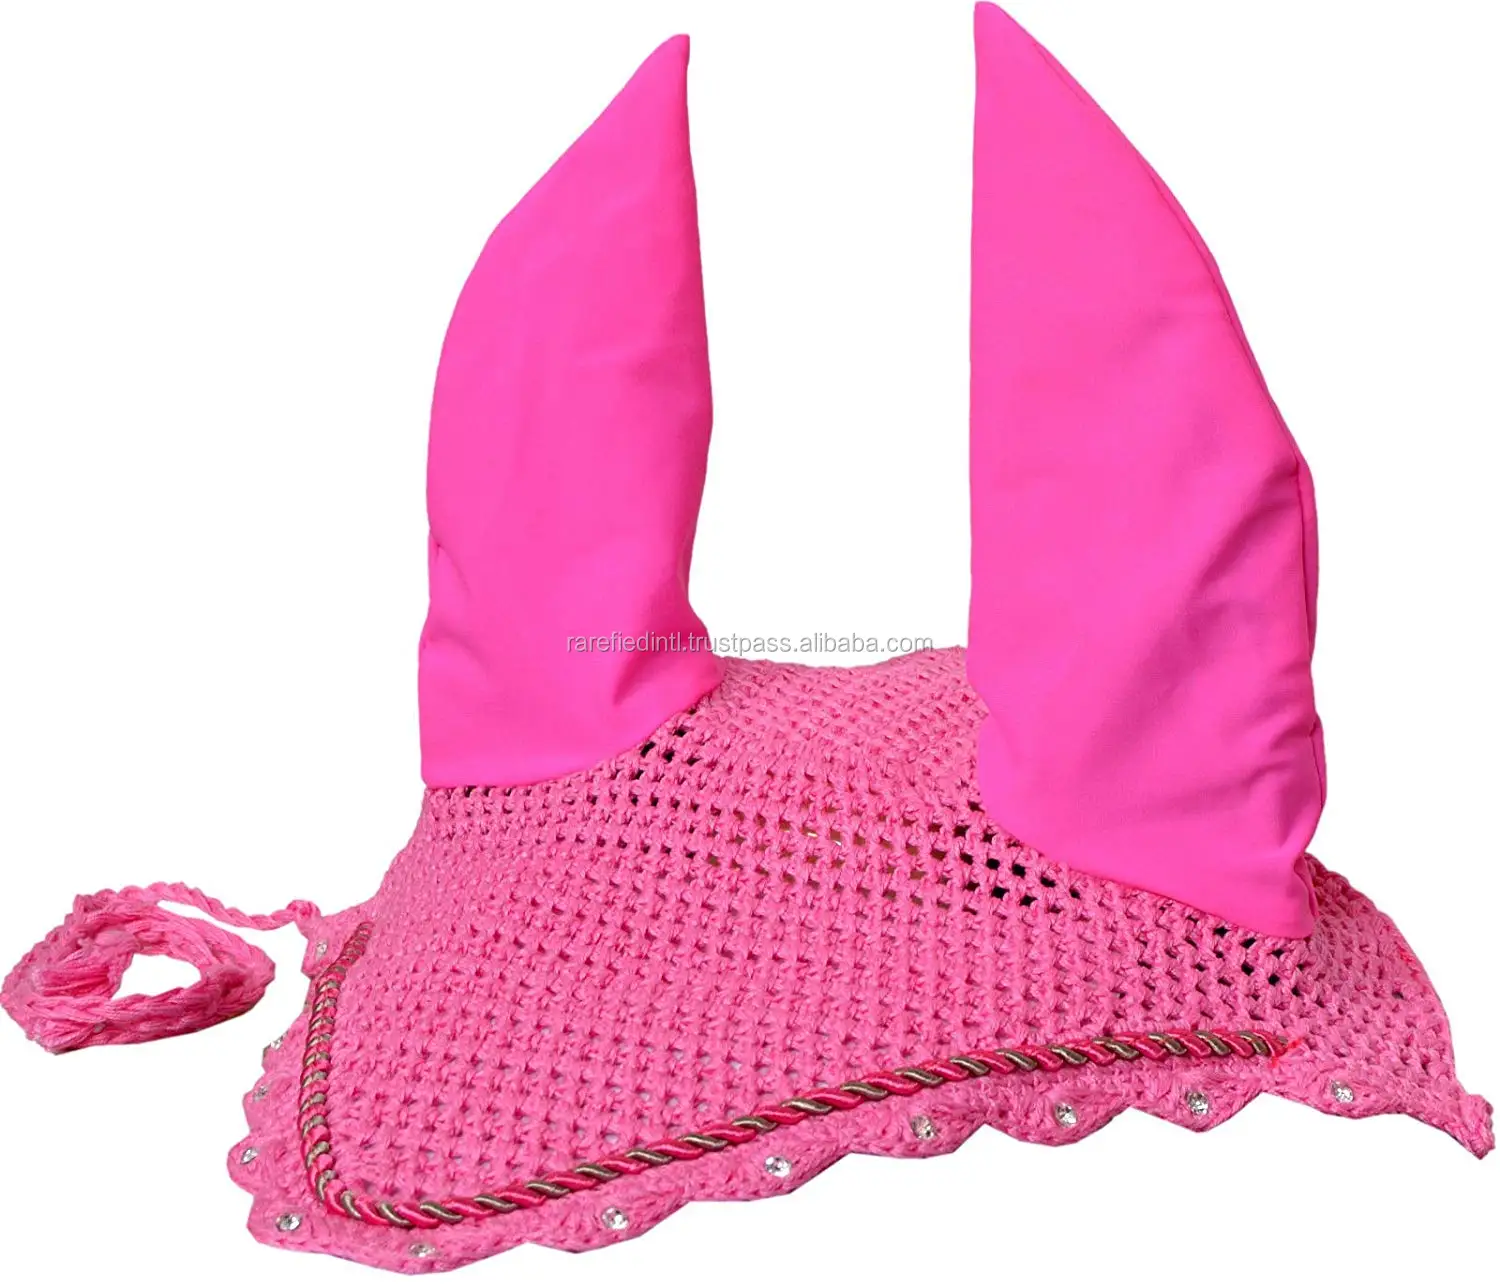 FULL COB EAR NET CROCHET FLY VEIL EQUESTRIAN HORSE WITH CRYSTALS PINK PONY 